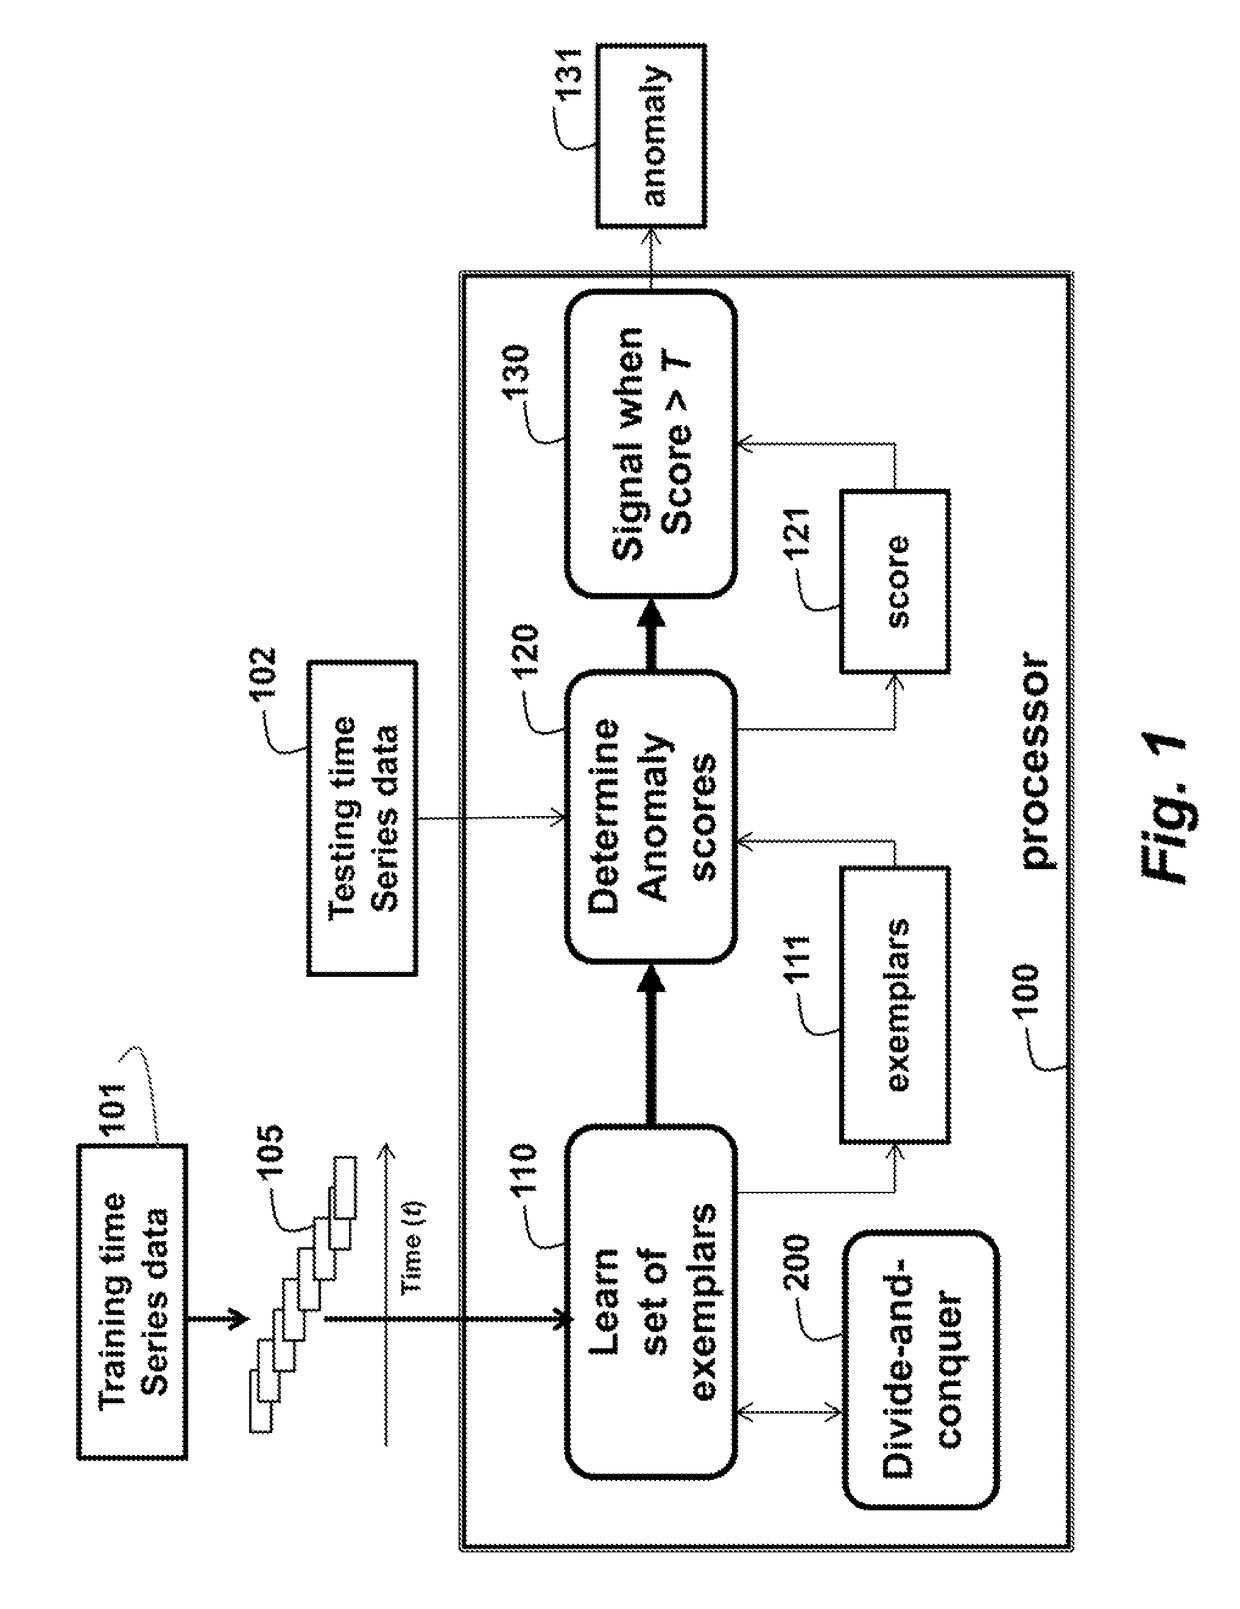 Method for learning exemplars for anomaly detection